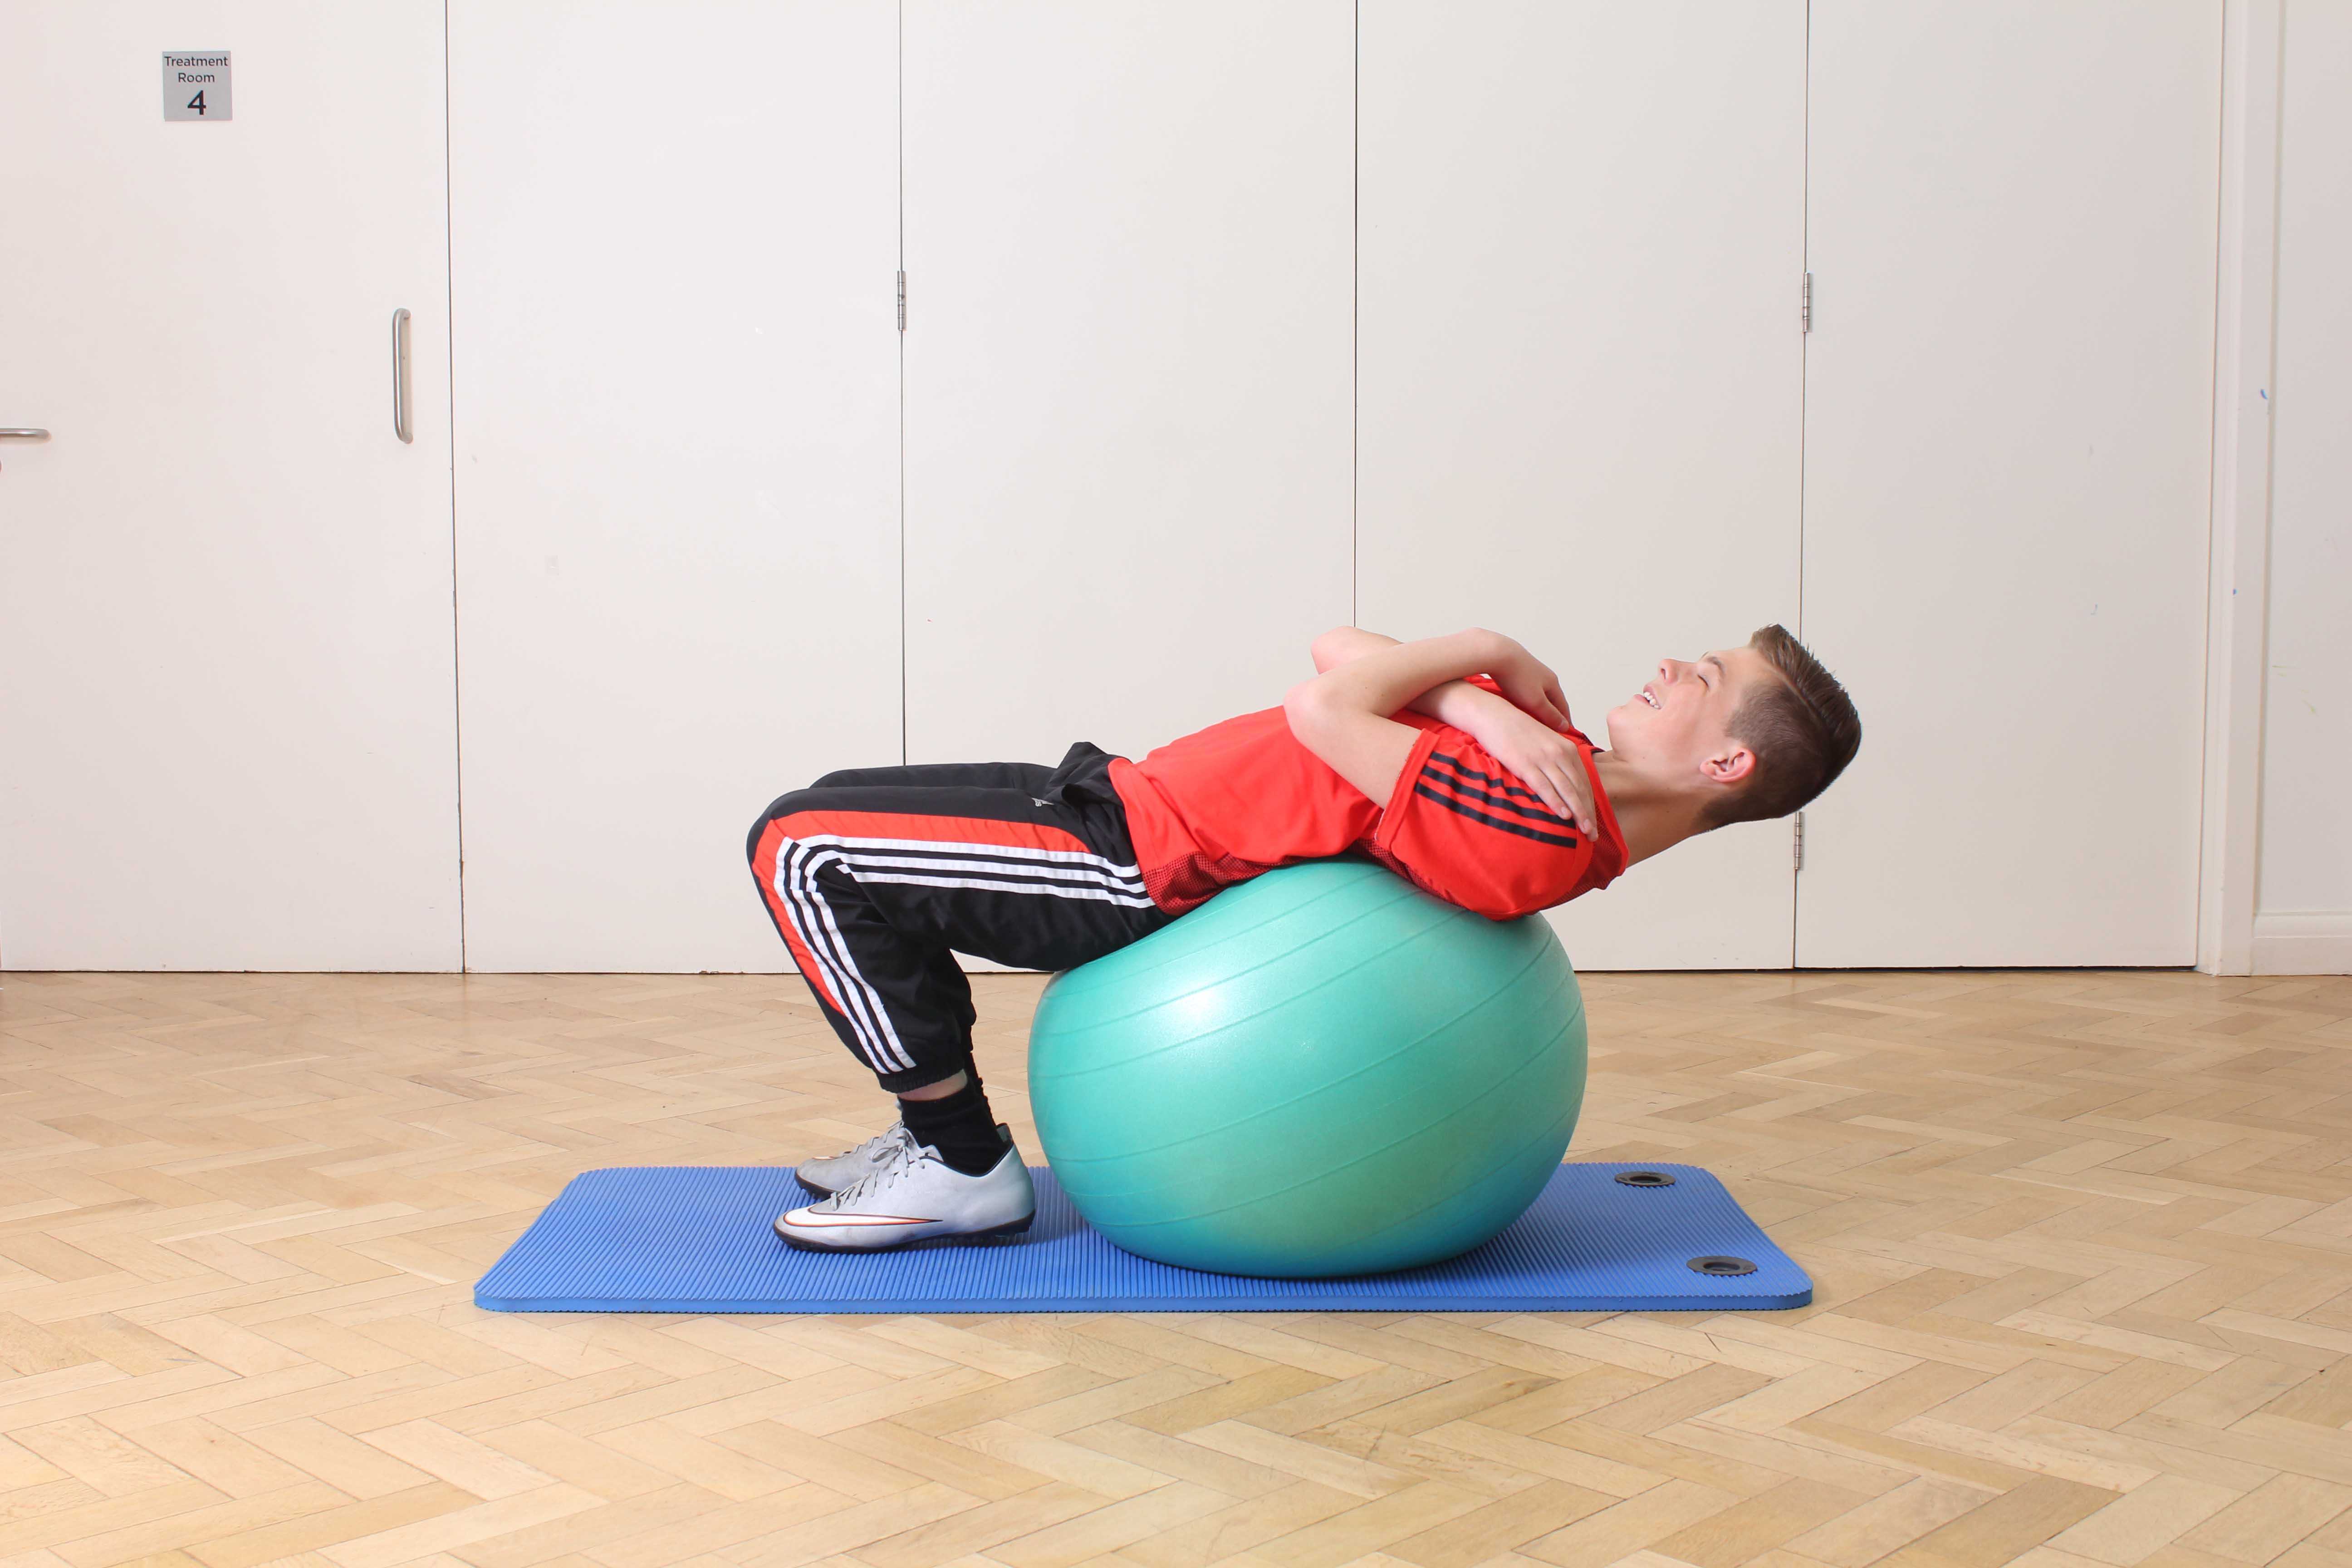 Toning and flexibility exercises performed under supervision of a paediatric physiotherapist